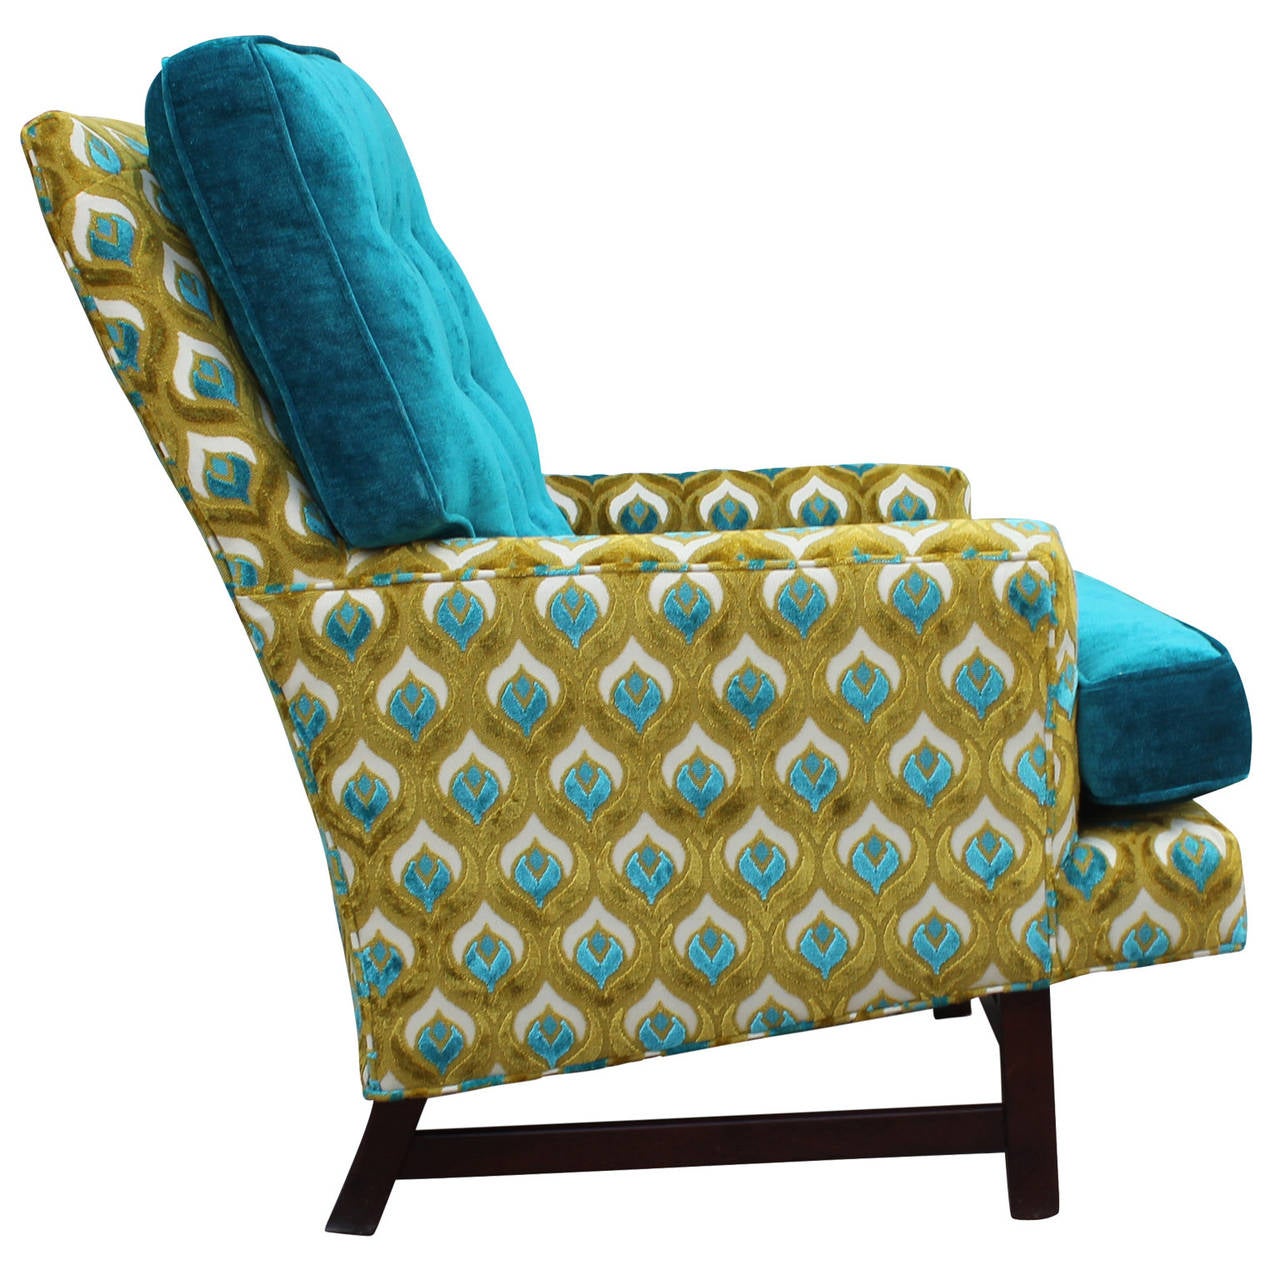 Mid-Century Modern Dunbar Style Lounge Chair in Turquoise and Lime Velvet